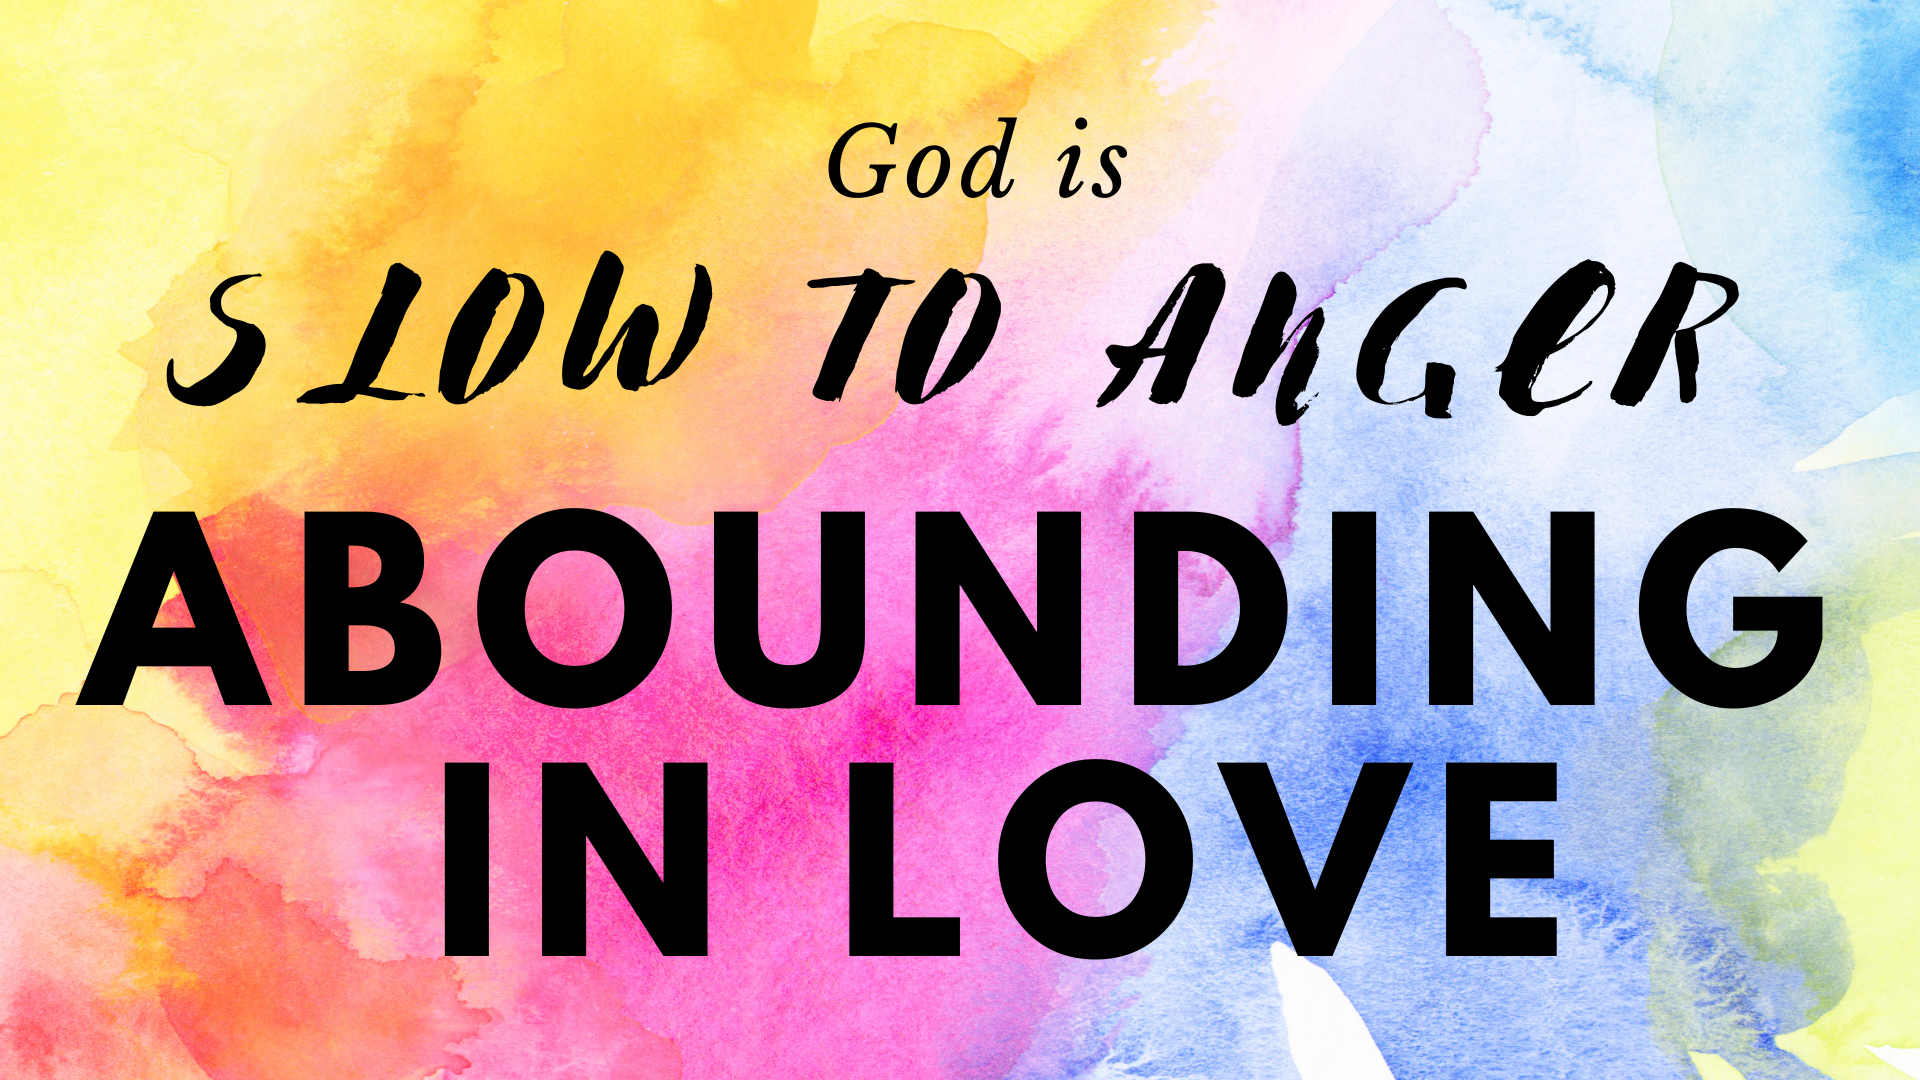 God is slow to anger and abounding in love